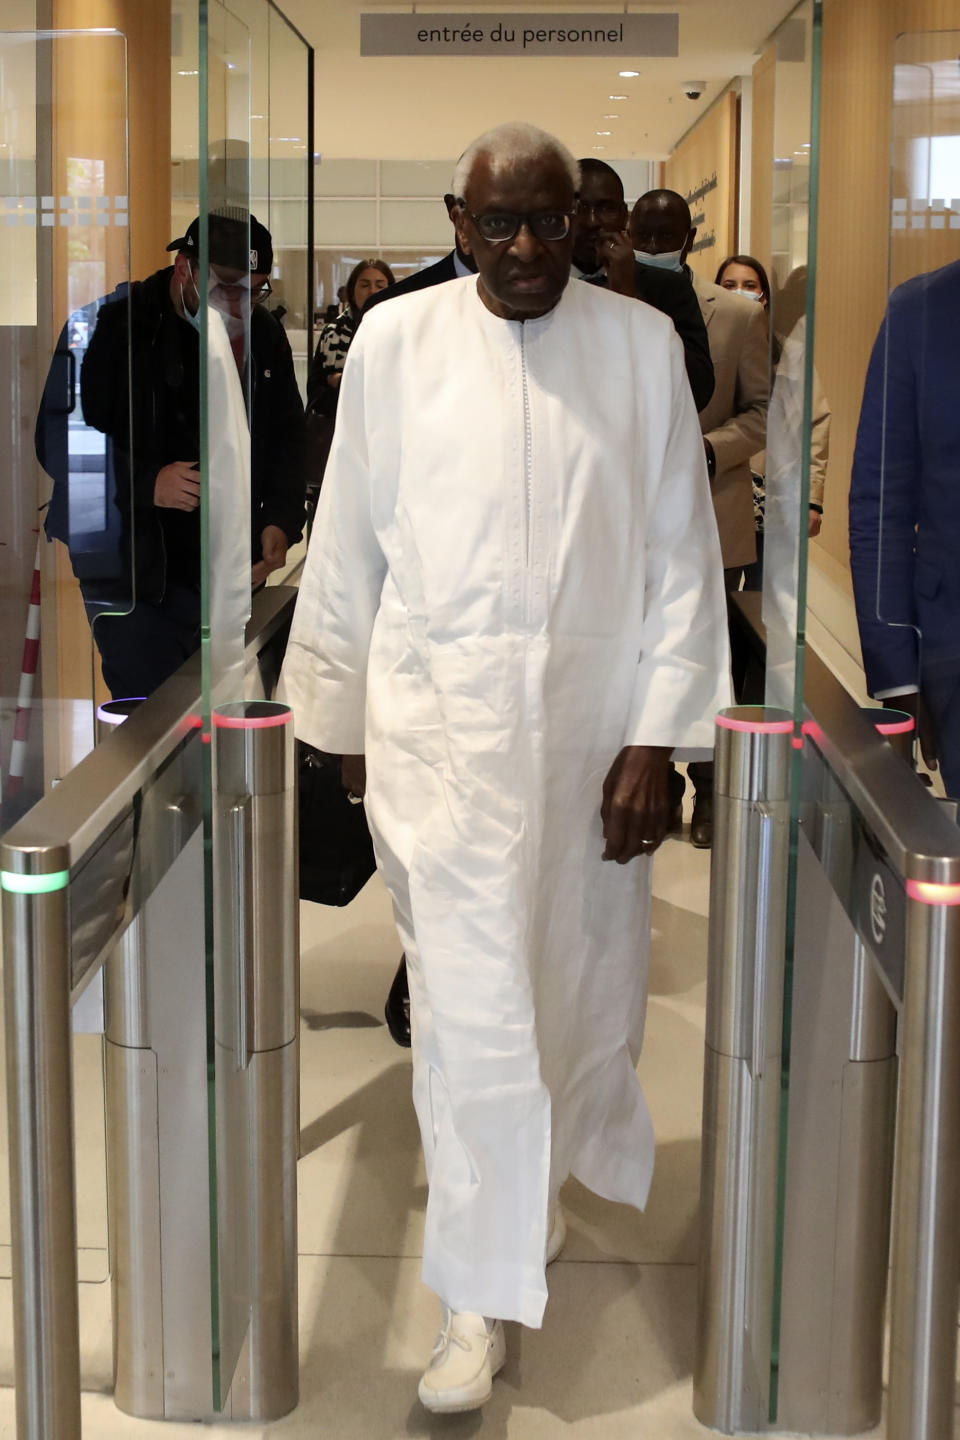 Former president of the IAAF (International Association of Athletics Federations) Lamine Diack arrives at the Paris courthouse, Wednesday, June 10, 2020. A sweeping sports corruption trial opened Monday in Paris involving allegations of a massive doping cover-up that reached to the top of world track and field's governing body. Lamine Diack, 87, who served as president of the body for nearly 16 years, is among those accused of receiving money from Russian athletes to hide their suspected doping so they could compete at the Olympics in 2012 and other competitions. (AP Photo/Thibault Camus)